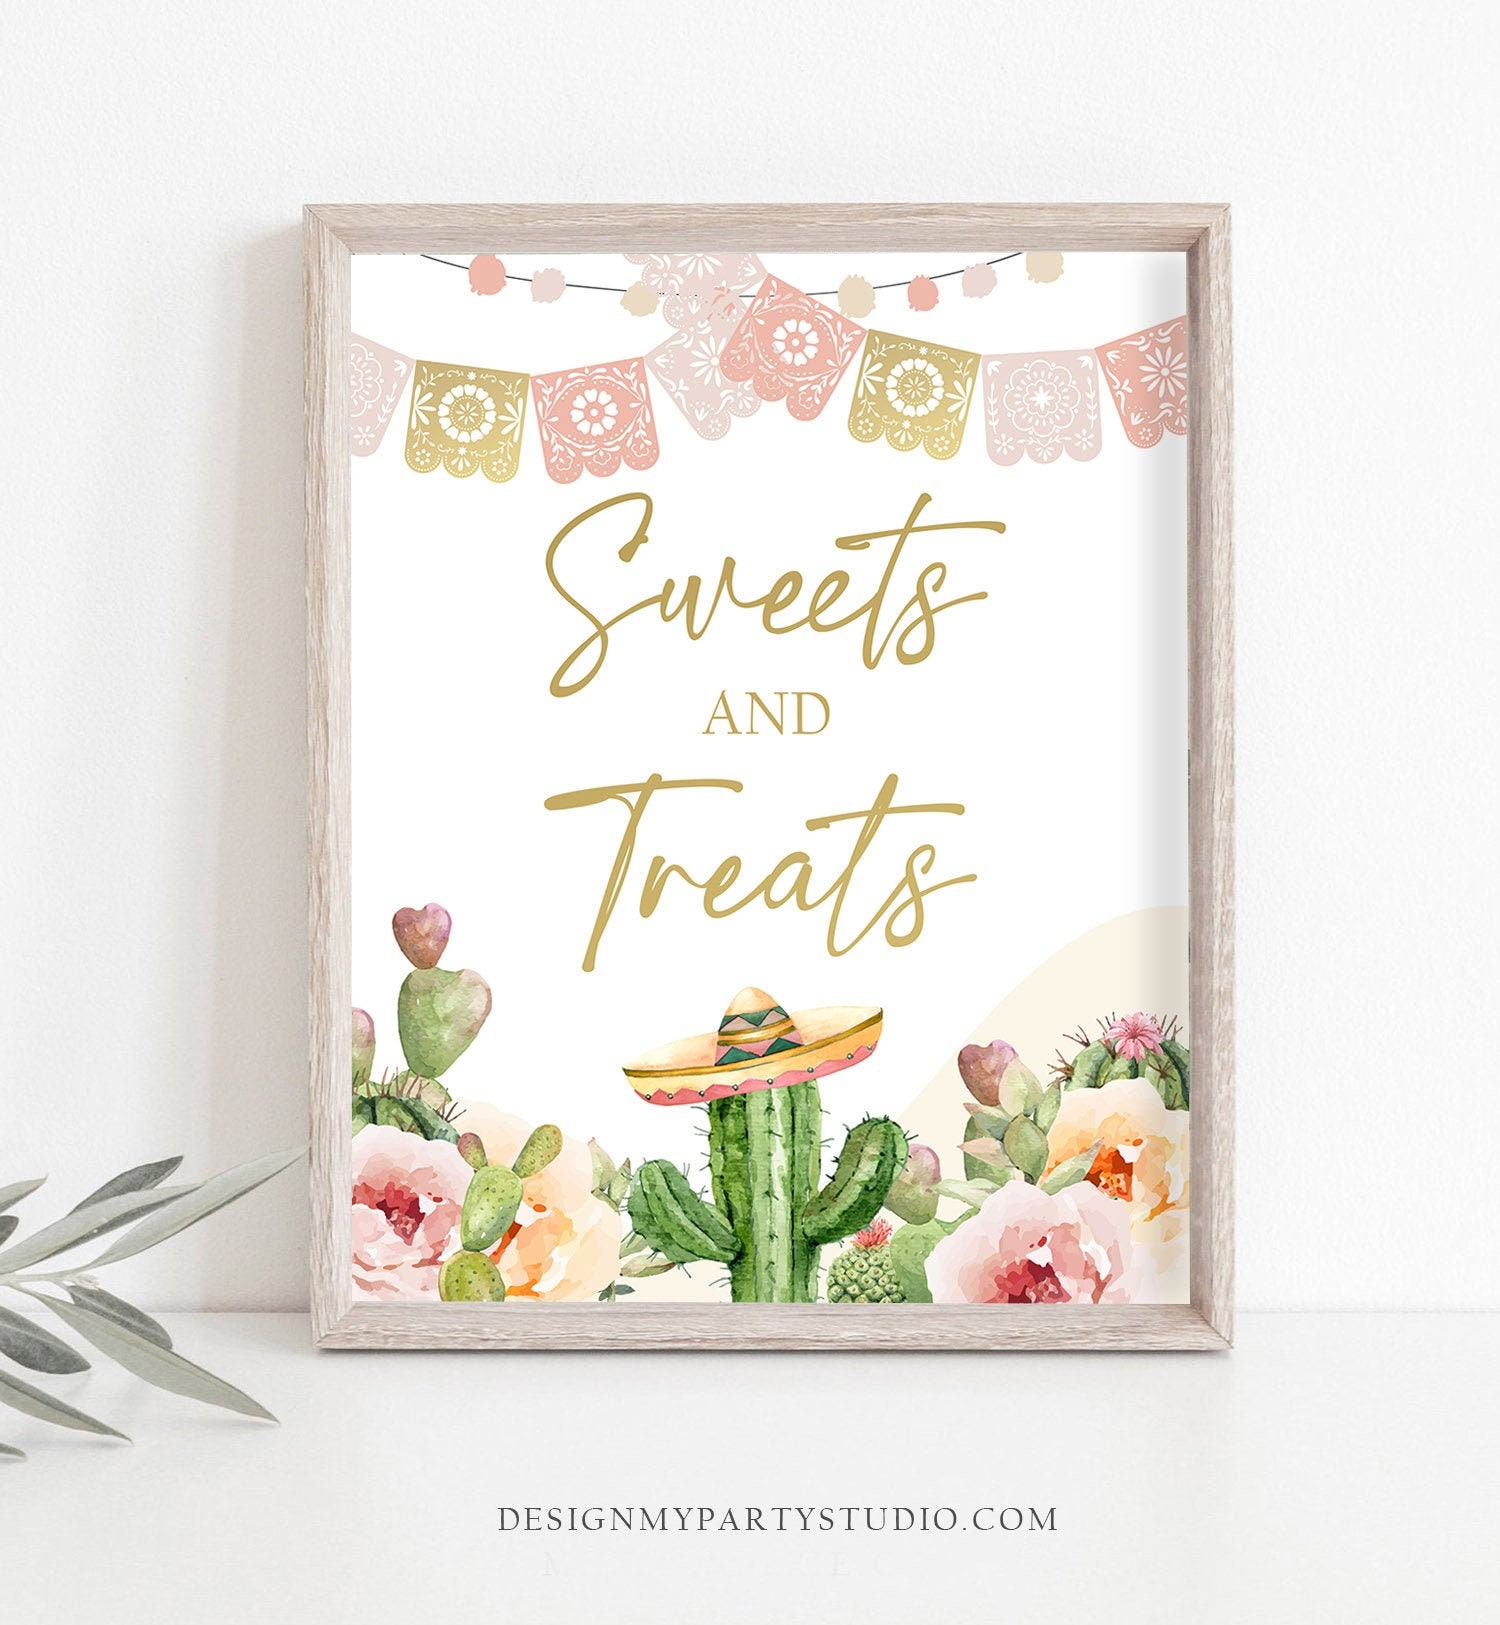 Cards and Gifts Sign Fiesta Cactus Succulent Gift Table Birthday Party Baby Shower Decor Mexican 8x10 Instant Download PRINTABLE 0134